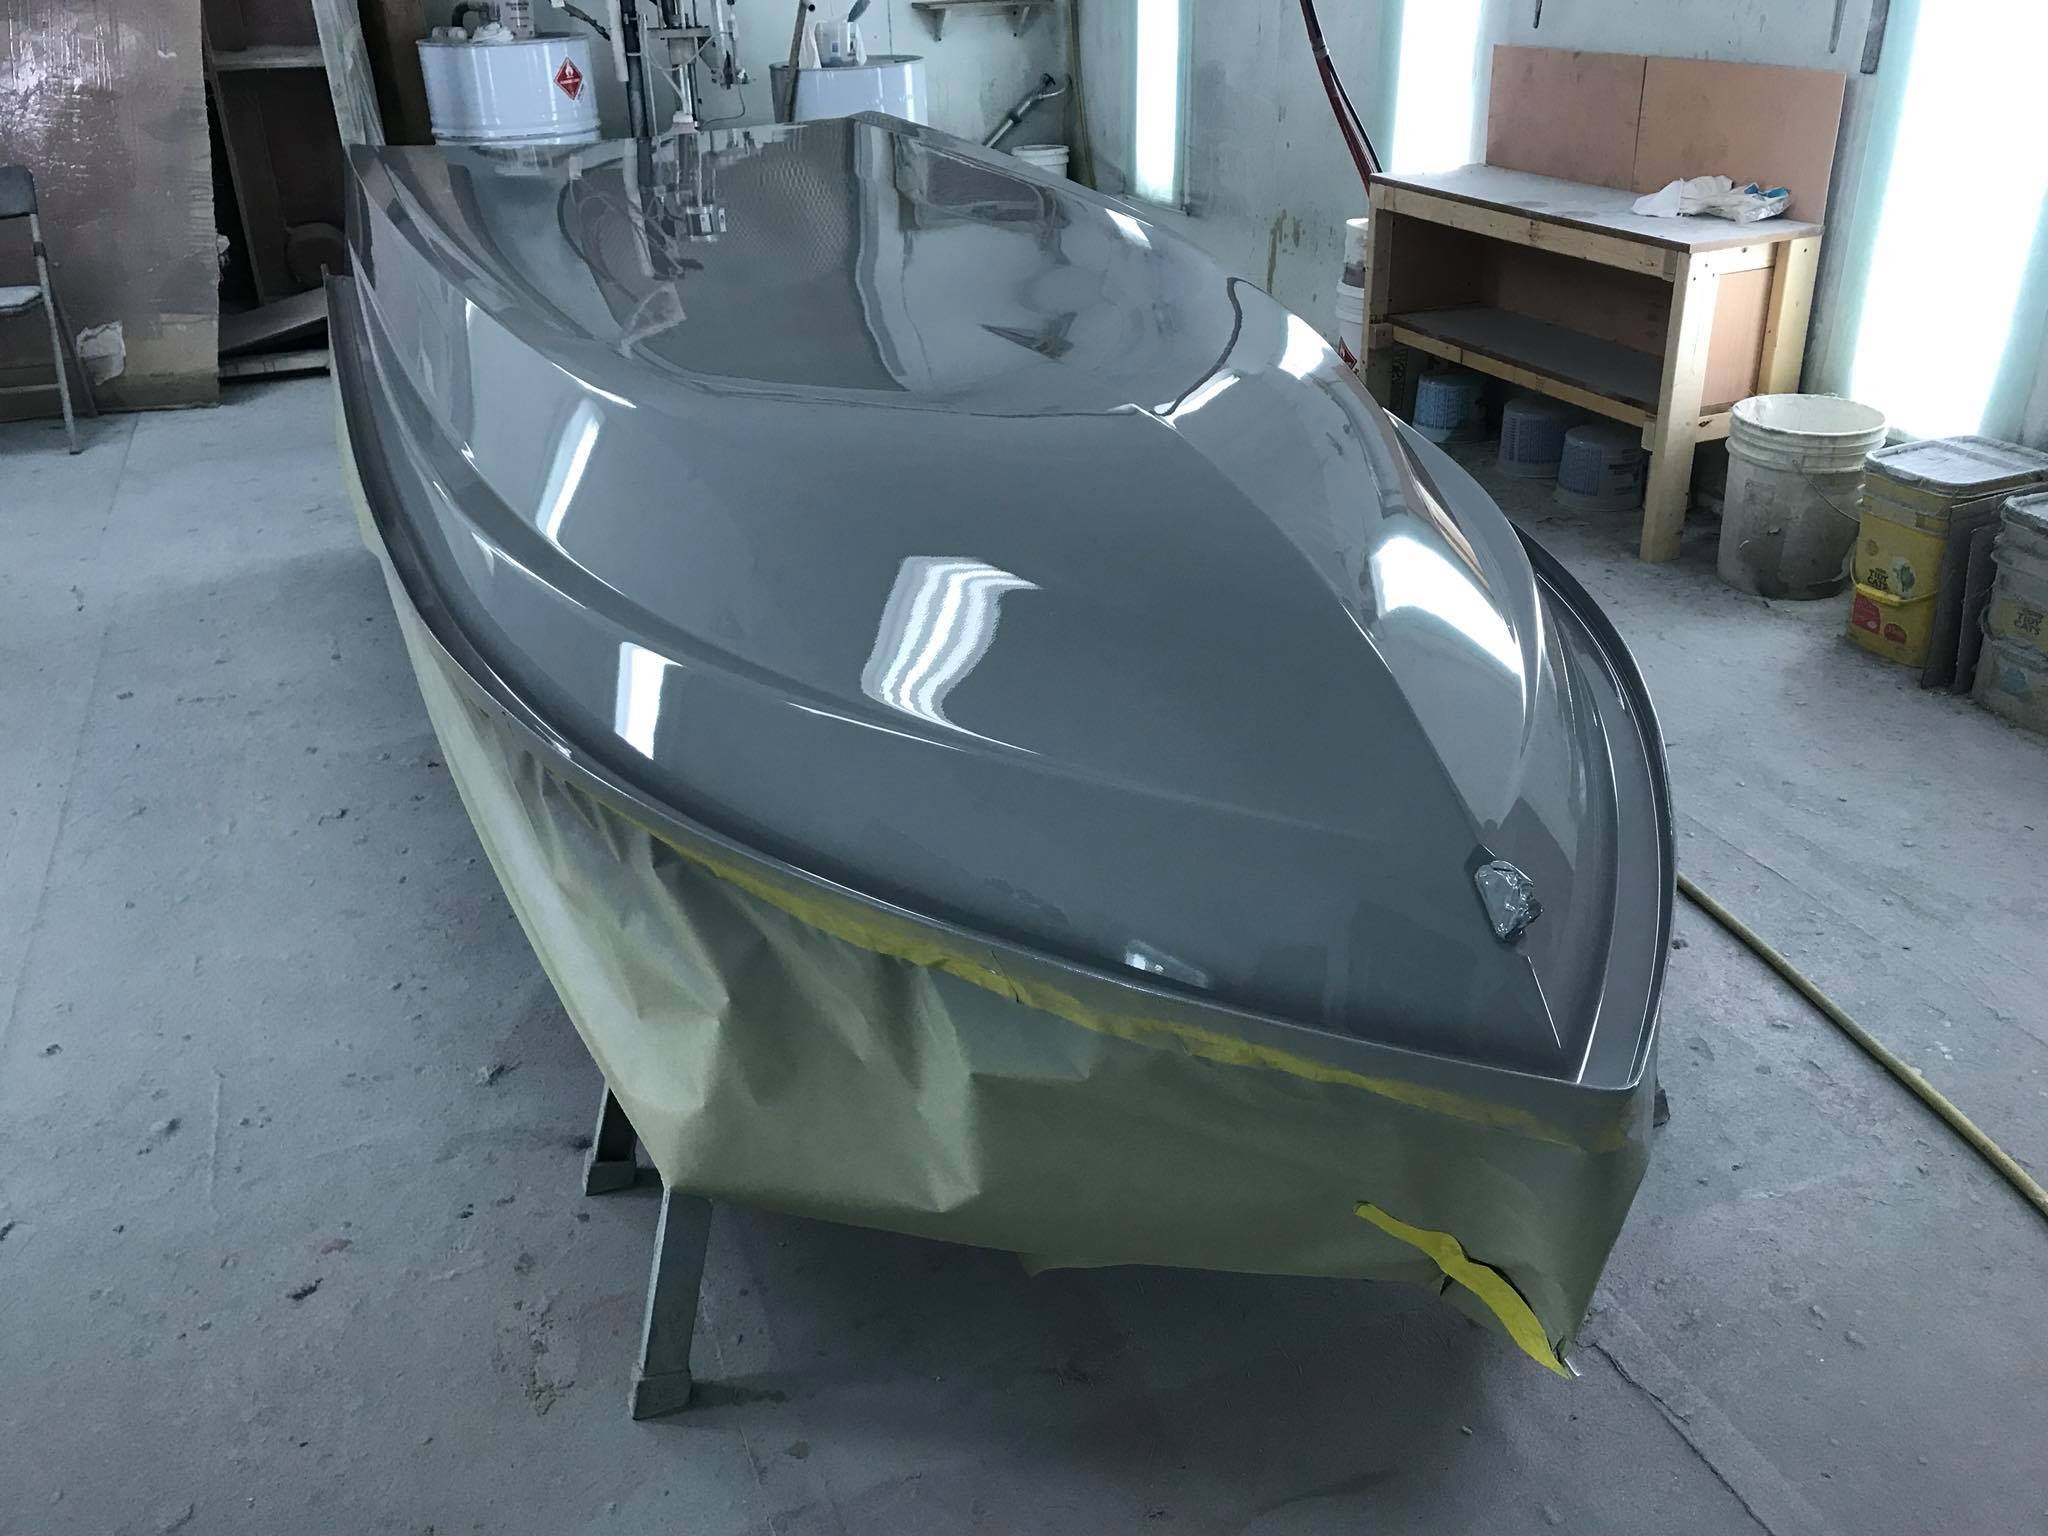 Micro Skiffs: Are These the Coolest Little Boats on the Water — Wave To Wave